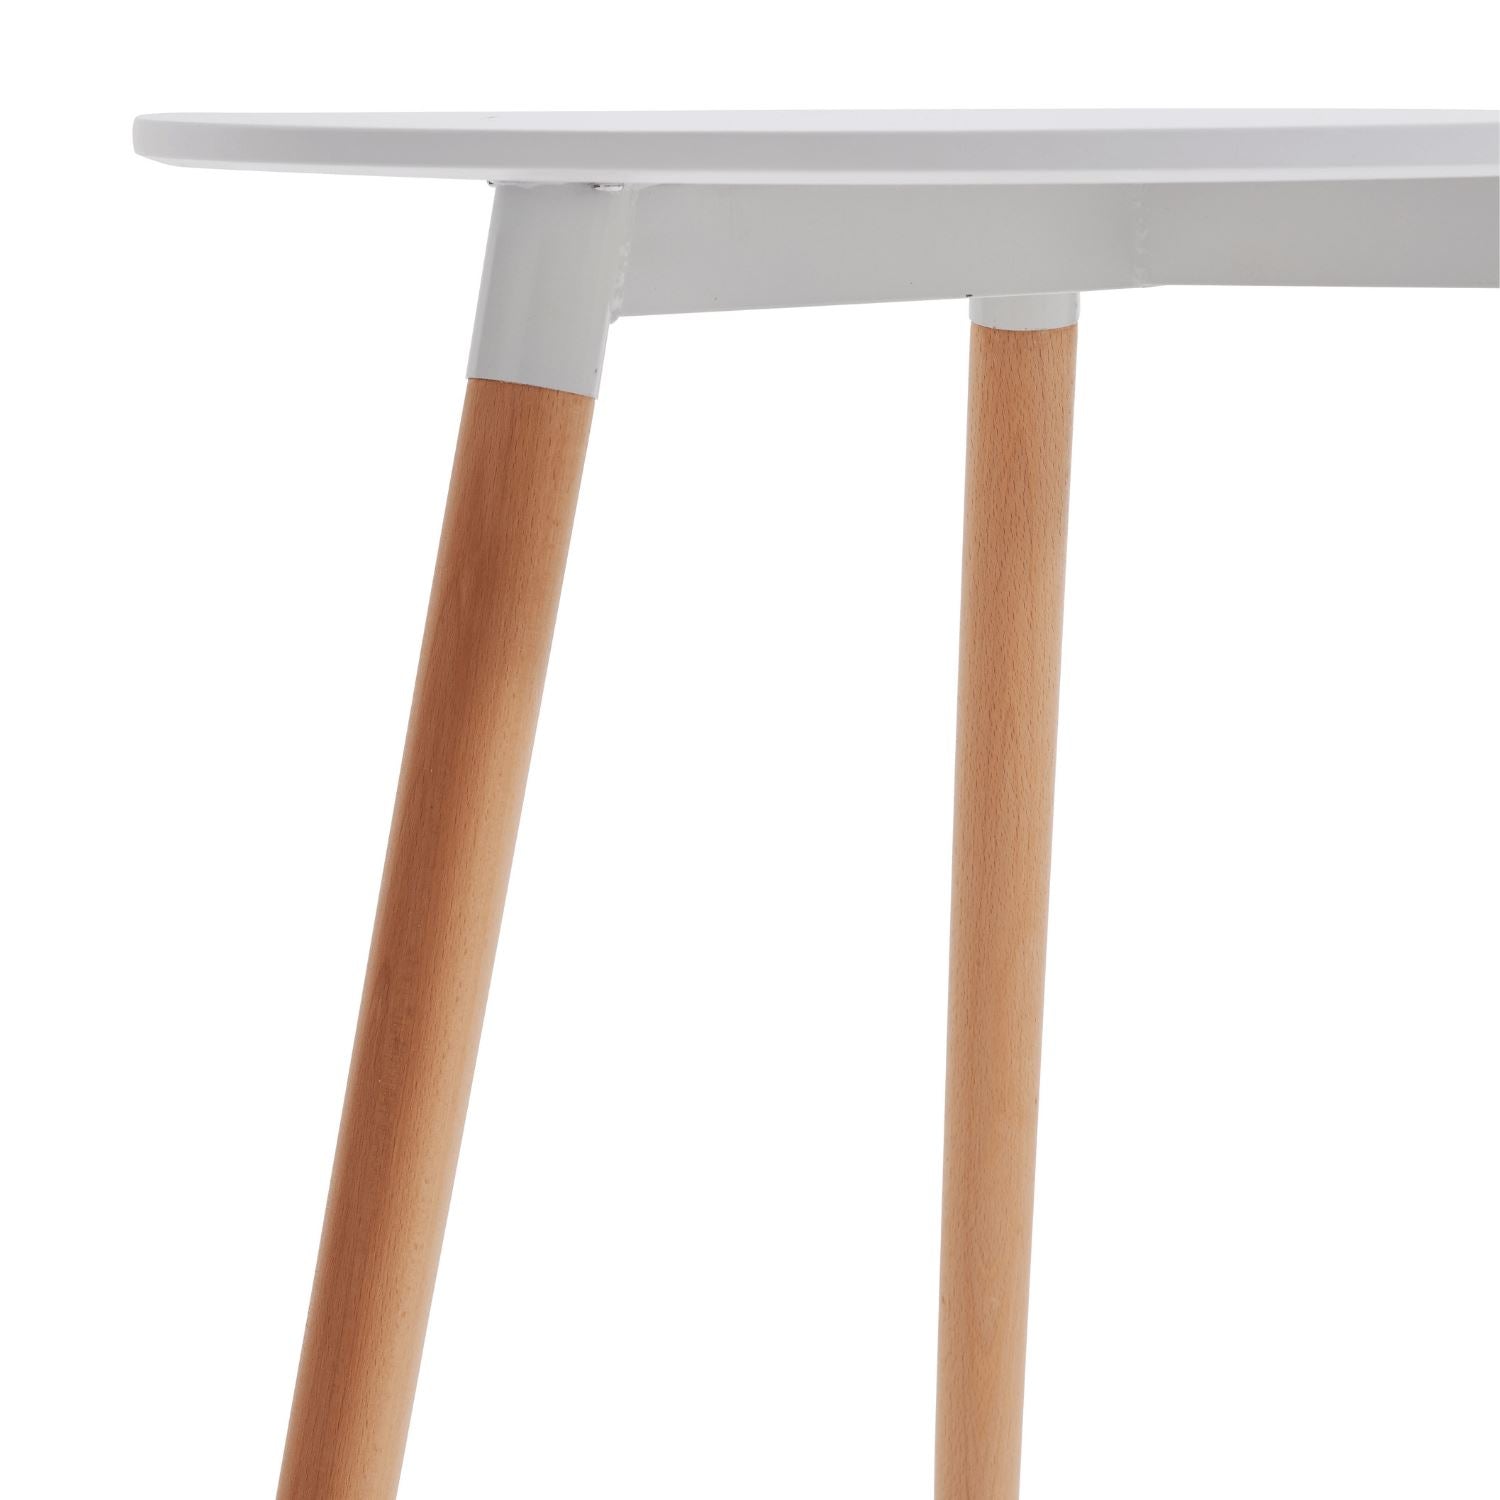 Valmes Table Valyou | Furniture